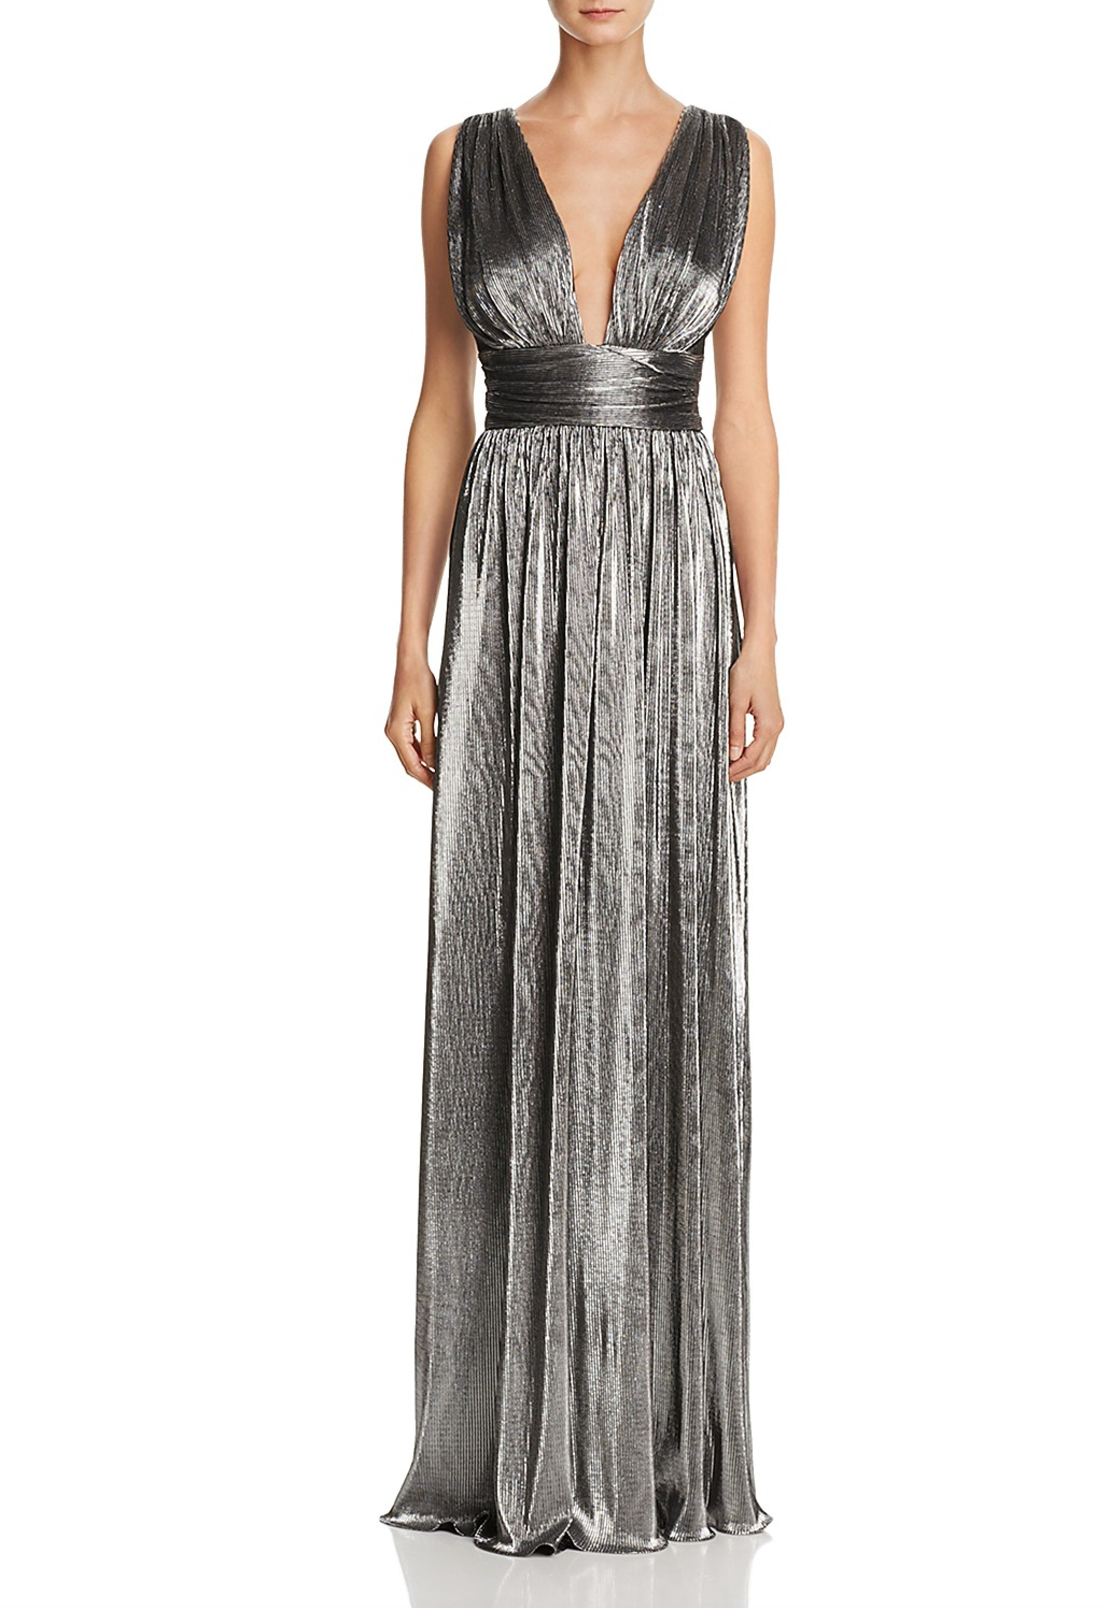 Gowns At Bloomingdales Outlet Online ...